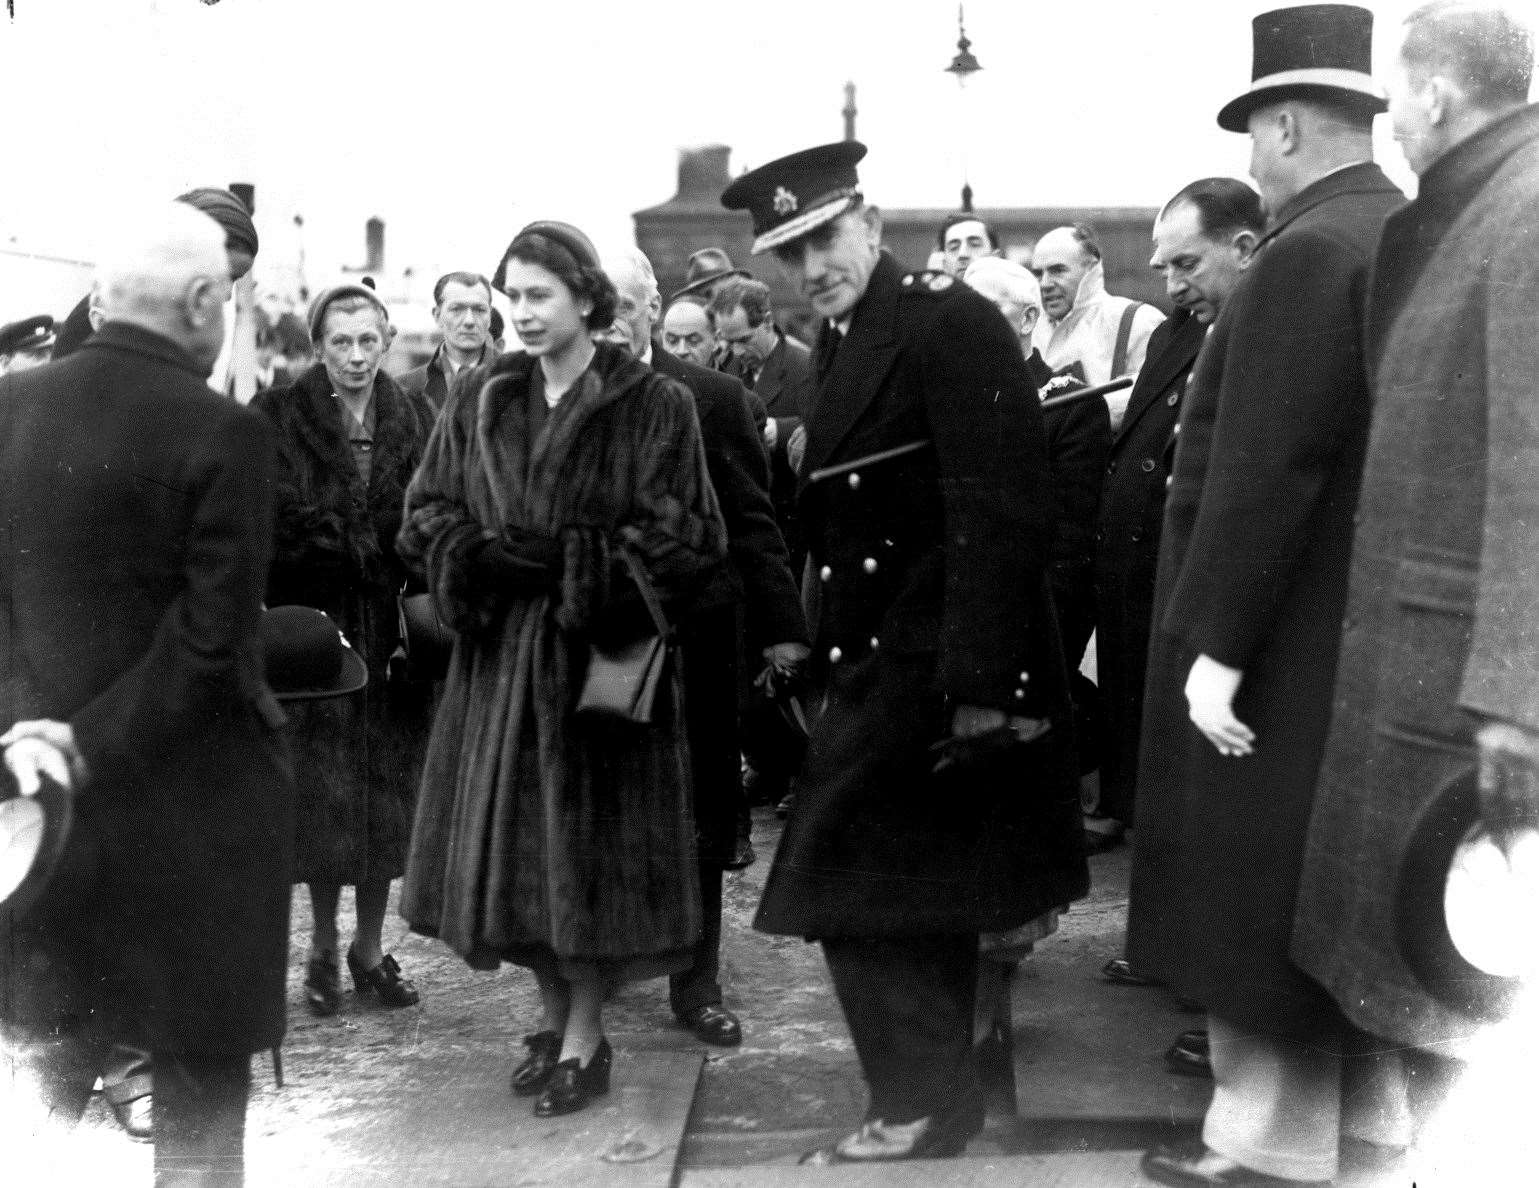 Queen Elizabeth visited Gravesend a week after the flood to see the damage for herself